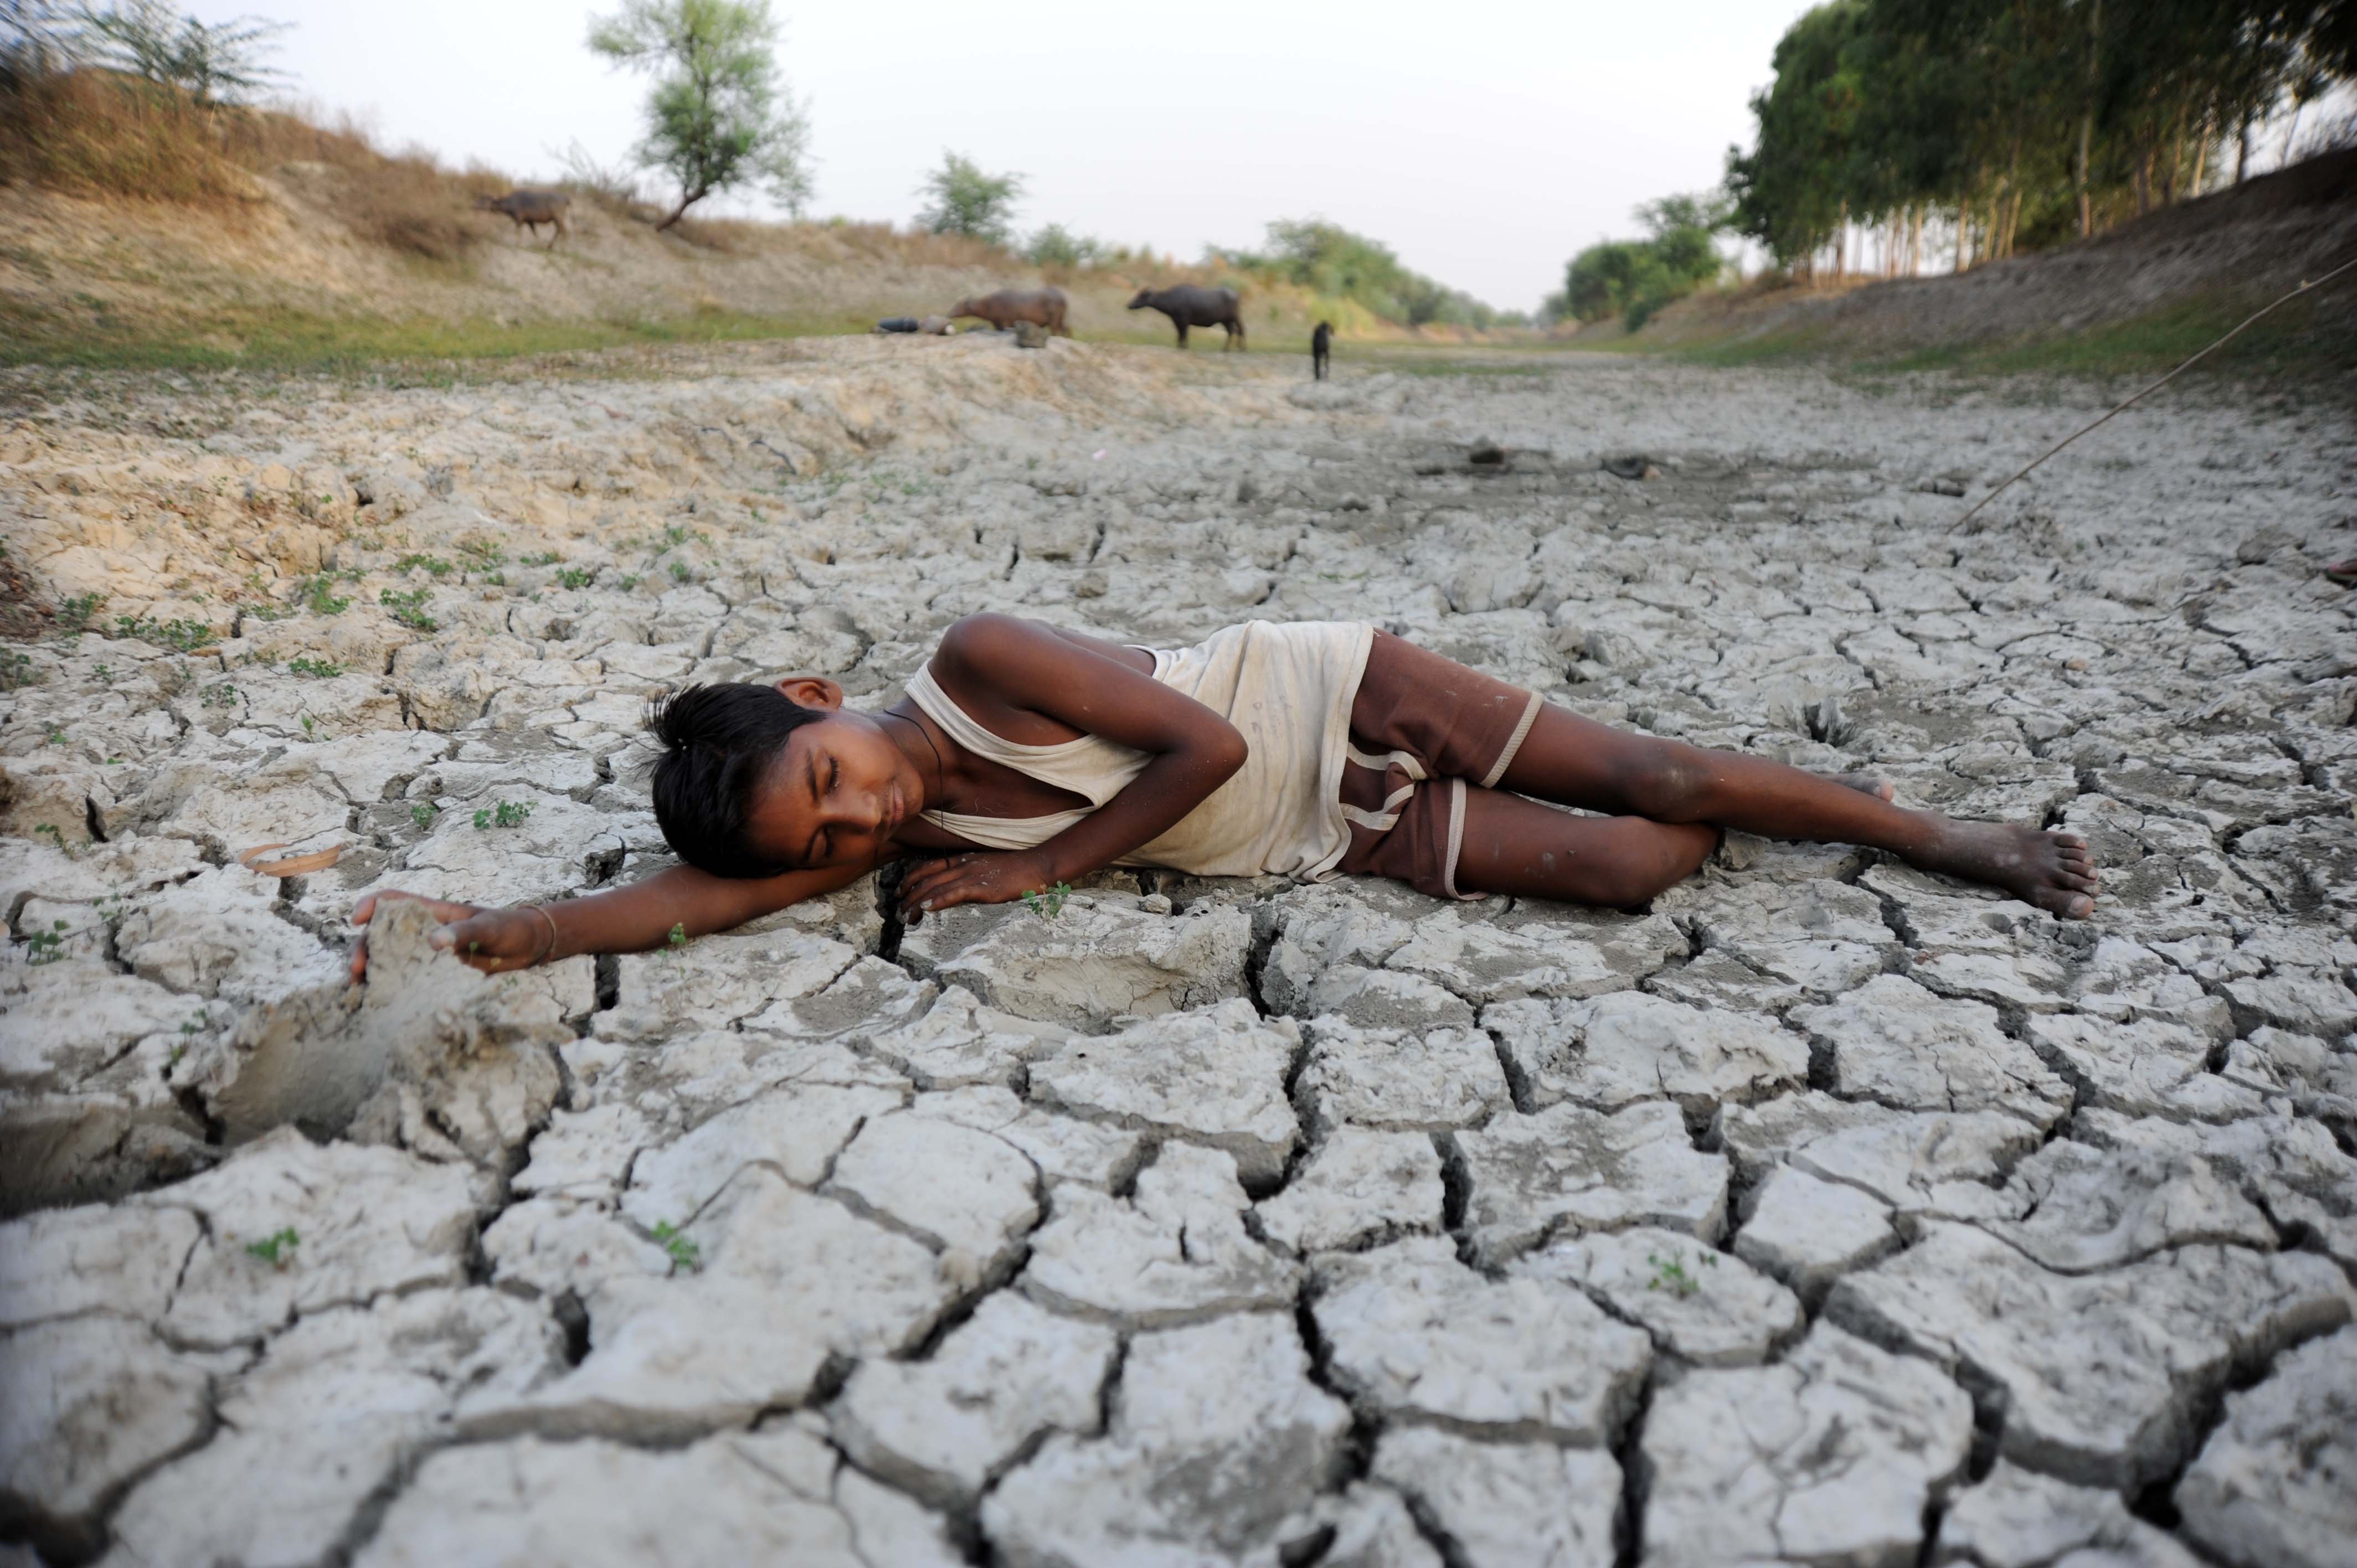 A child lies down on a dry bed of parched mud that is the